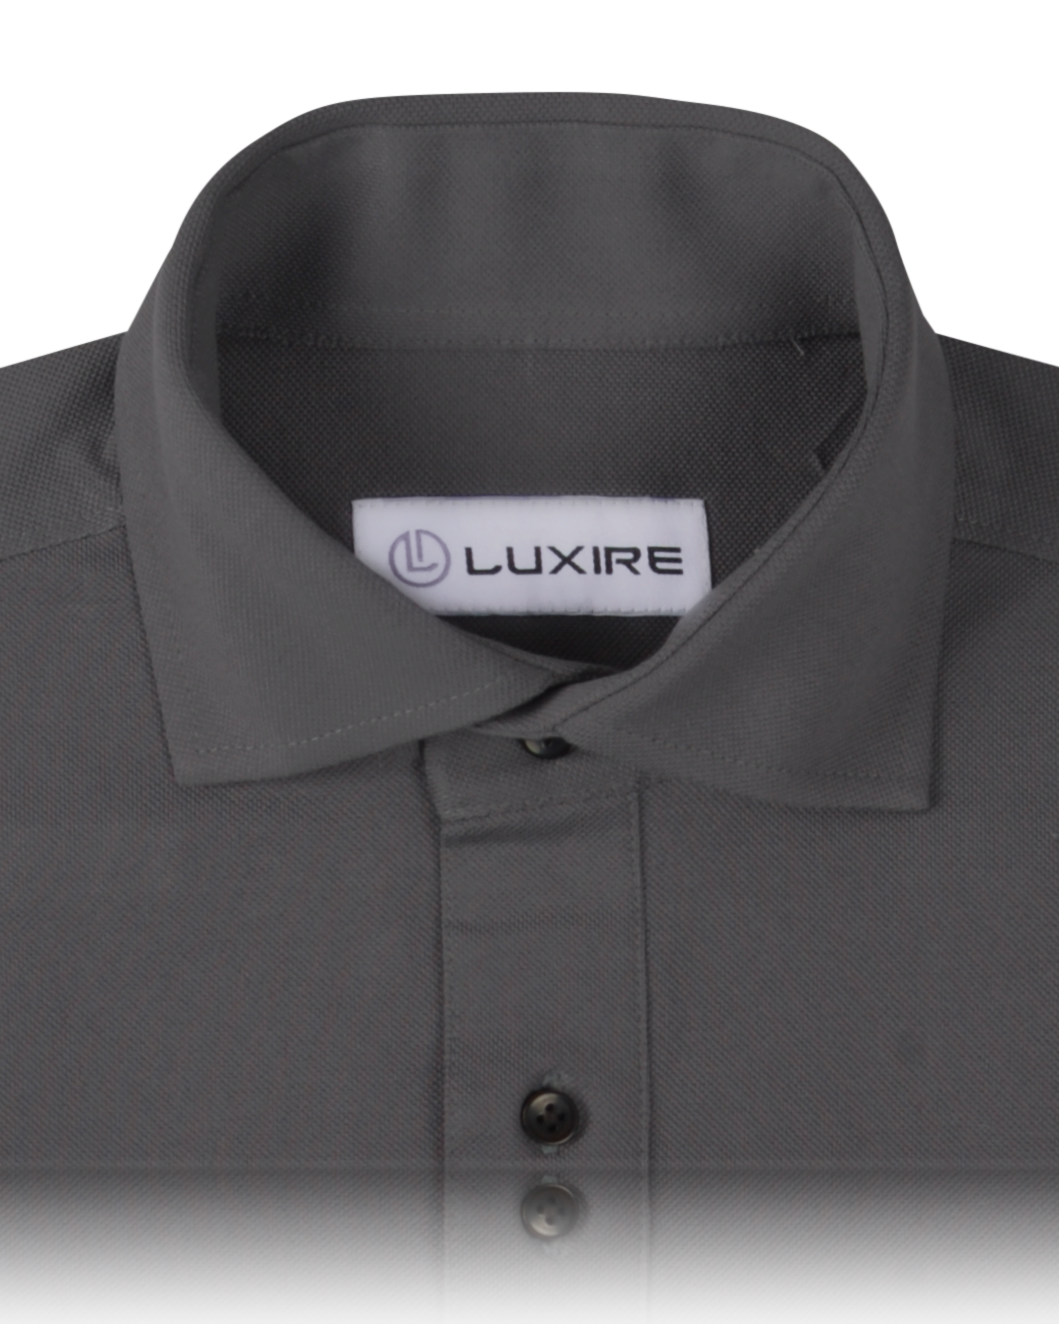 Collar of the custom oxford polo shirt for men by Luxire in ash grey